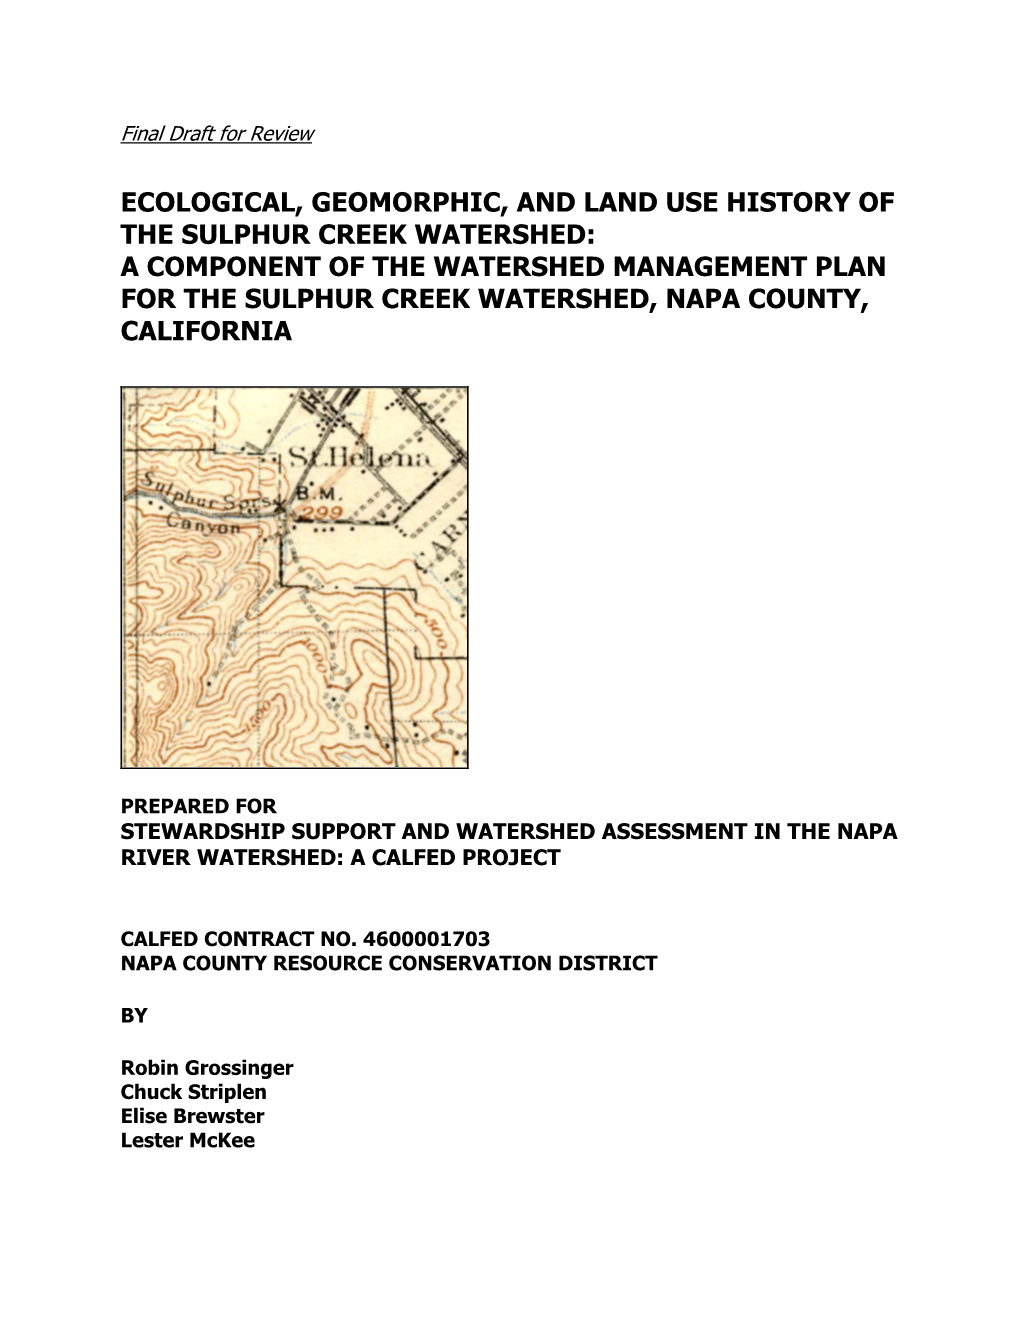 Historical Ecology for Sulphur Creek Watershed